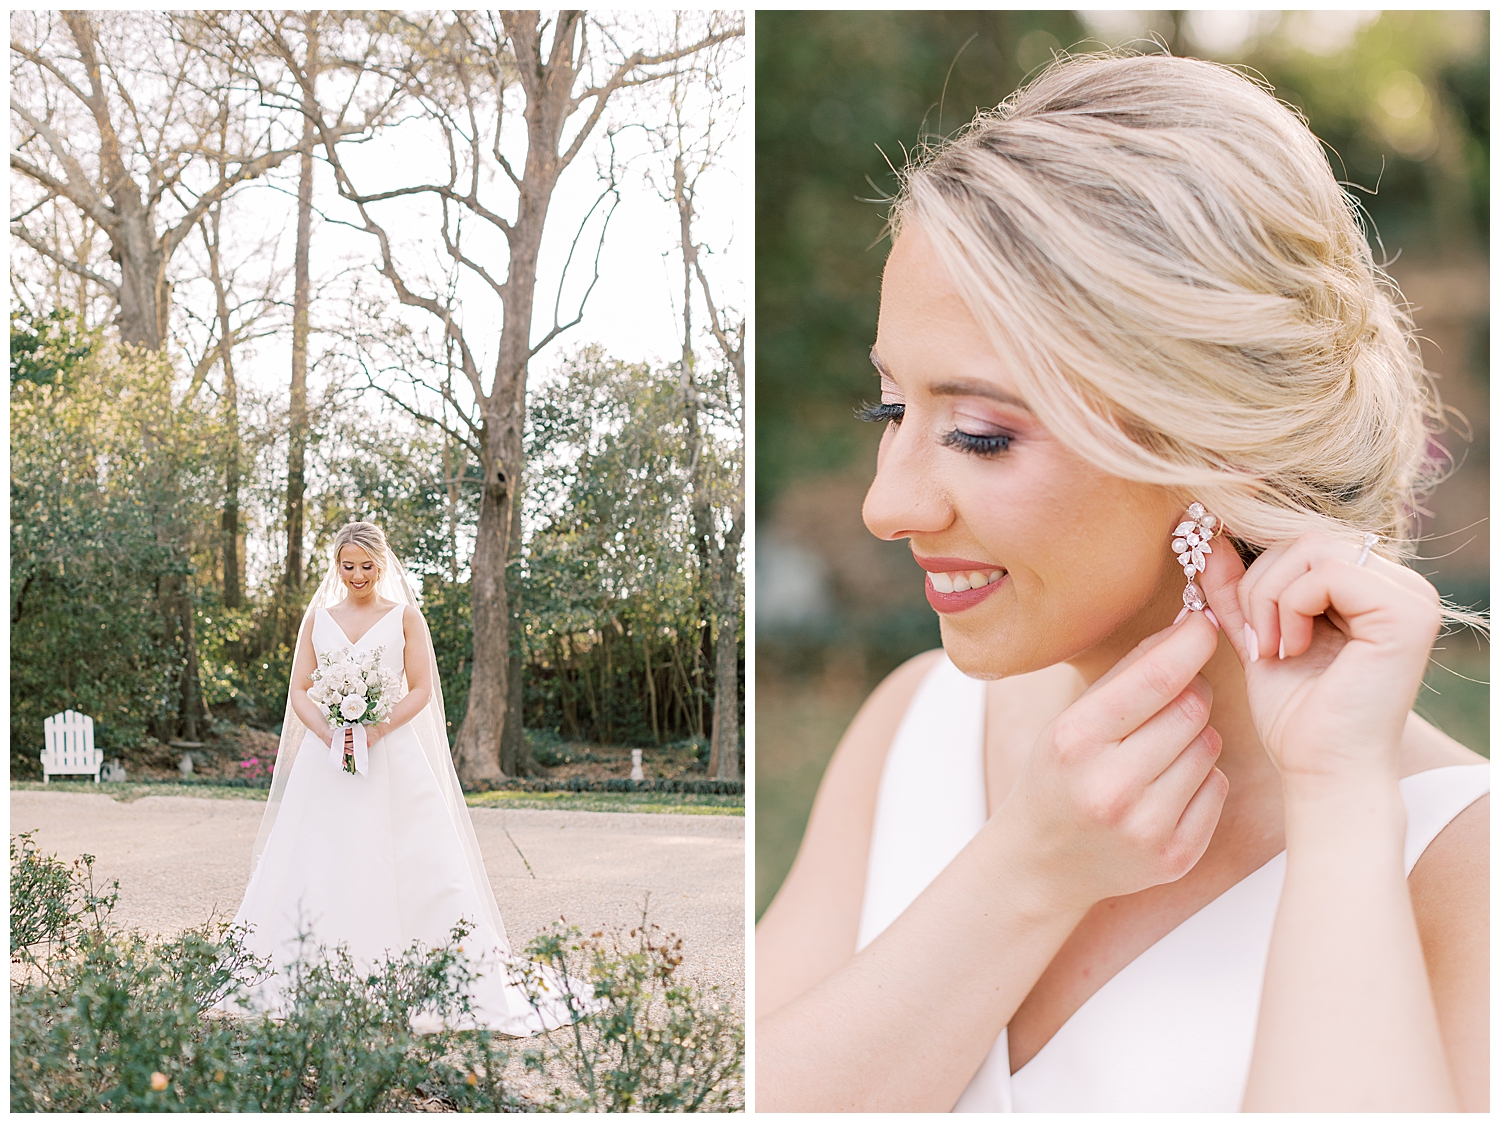 Juliann Riggs Photography captures a bride putting in her earring.